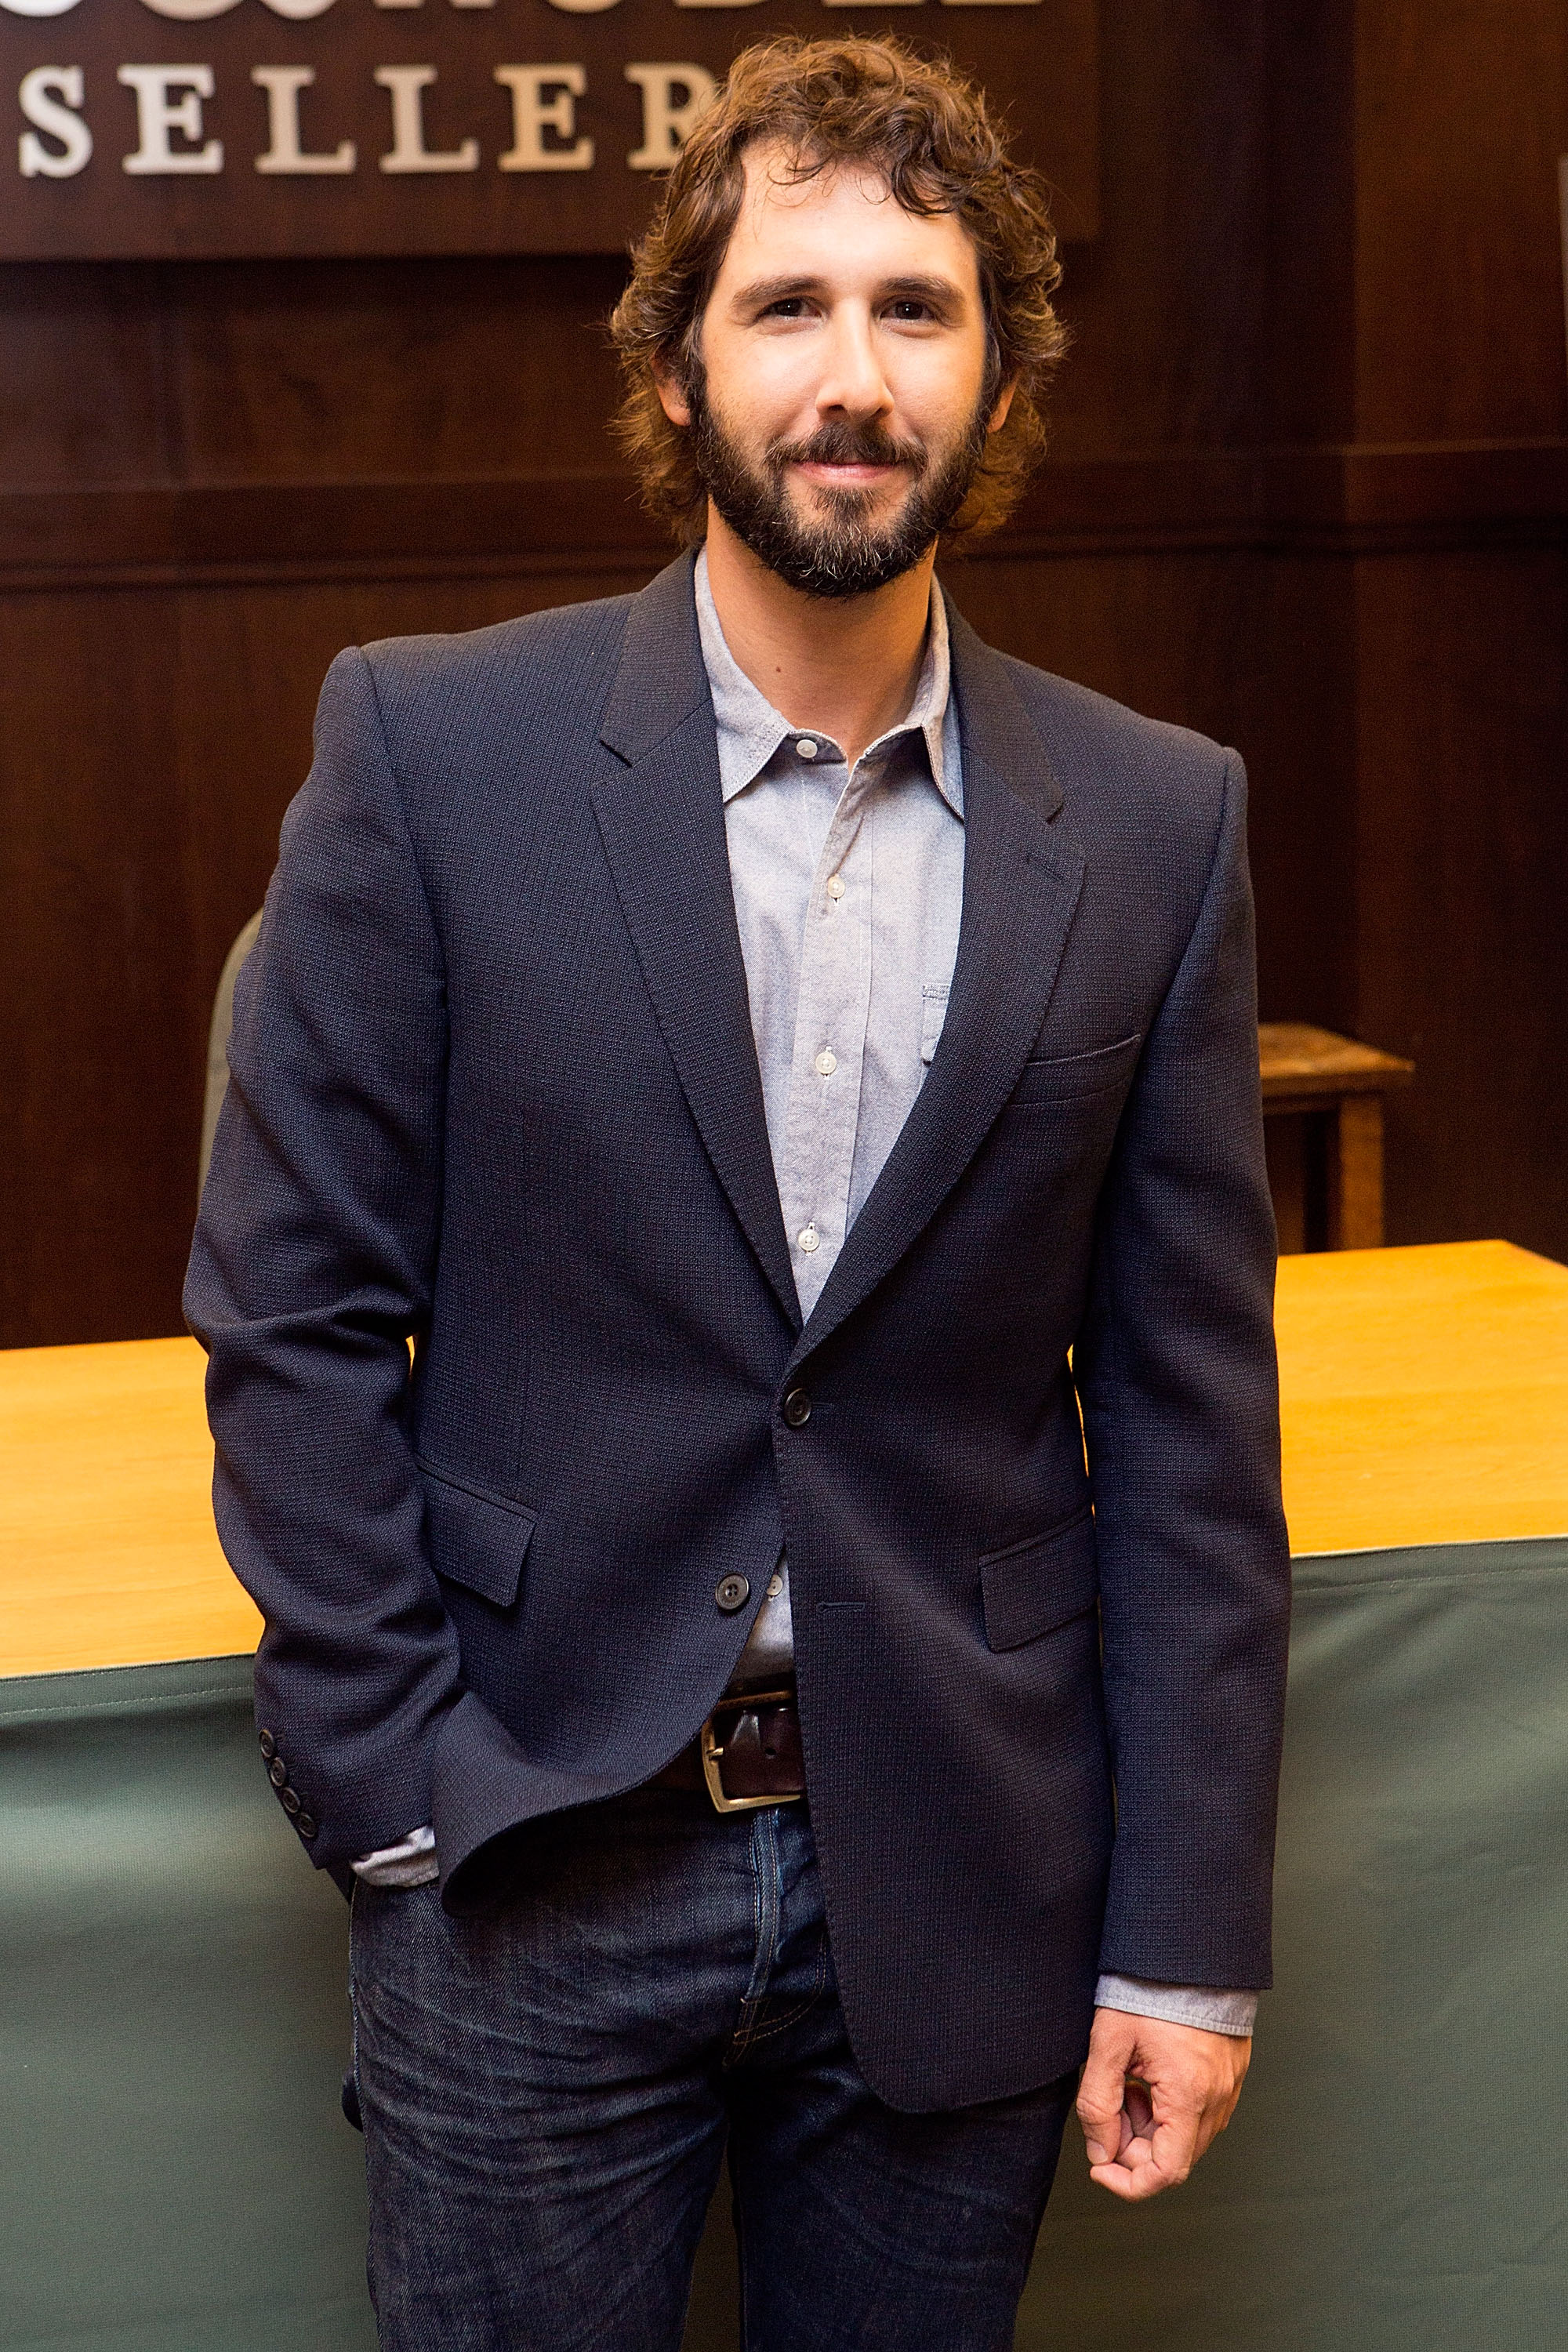 Josh Groban during a book signing at Barnes & Noble bookstore at The Grove. | Source: Getty Images 